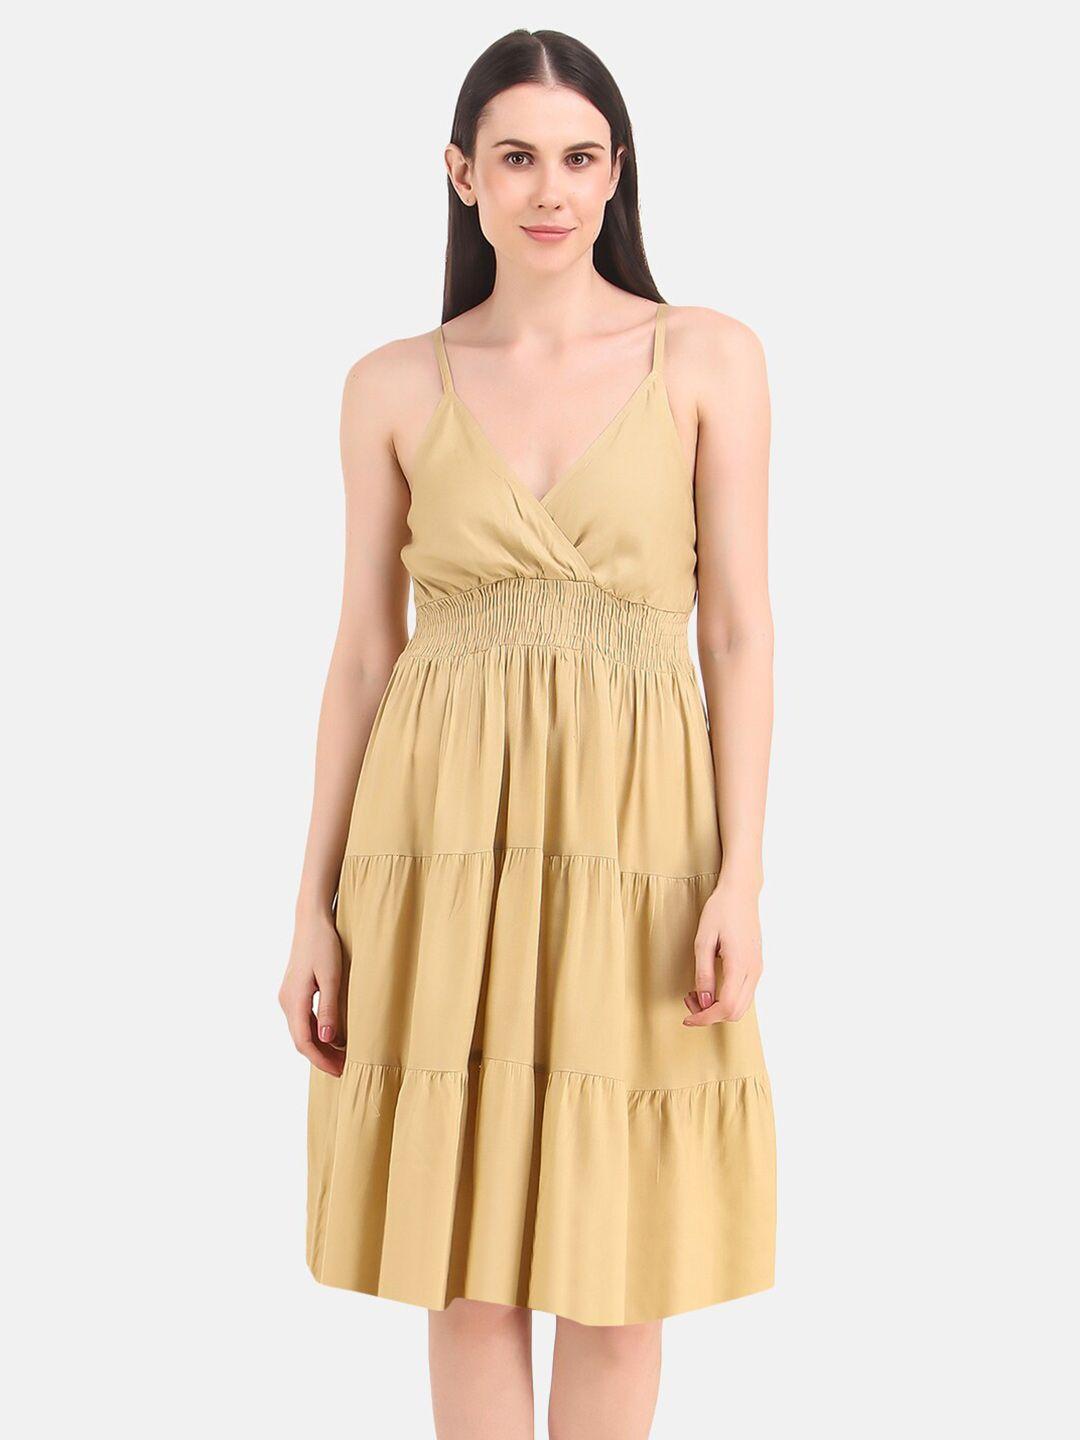 aawari beige fit and flare dress